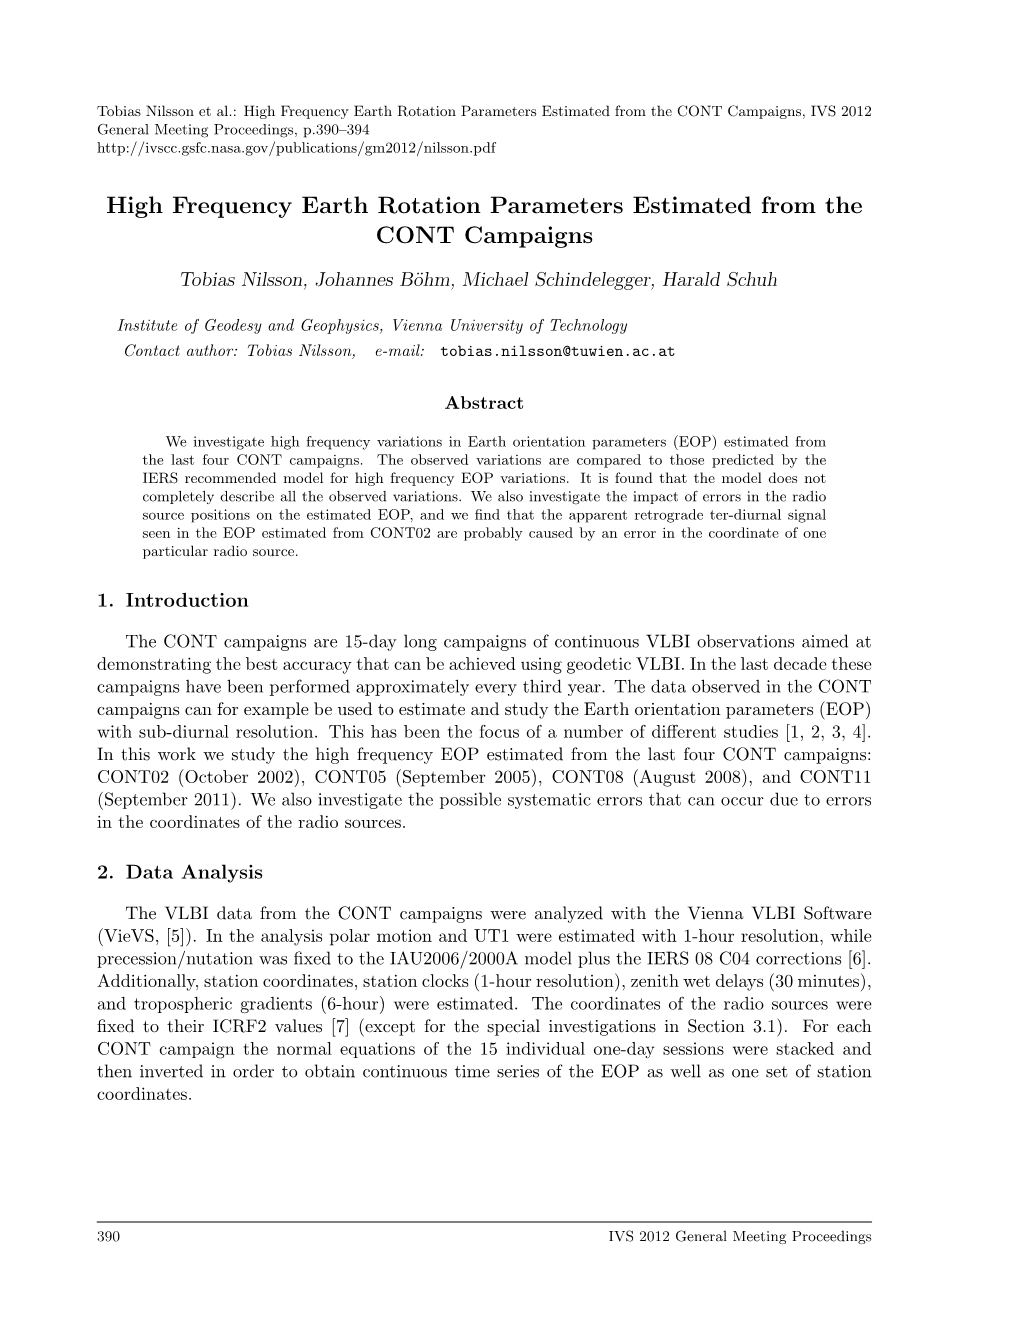 High Frequency Earth Rotation Parameters Estimated from The